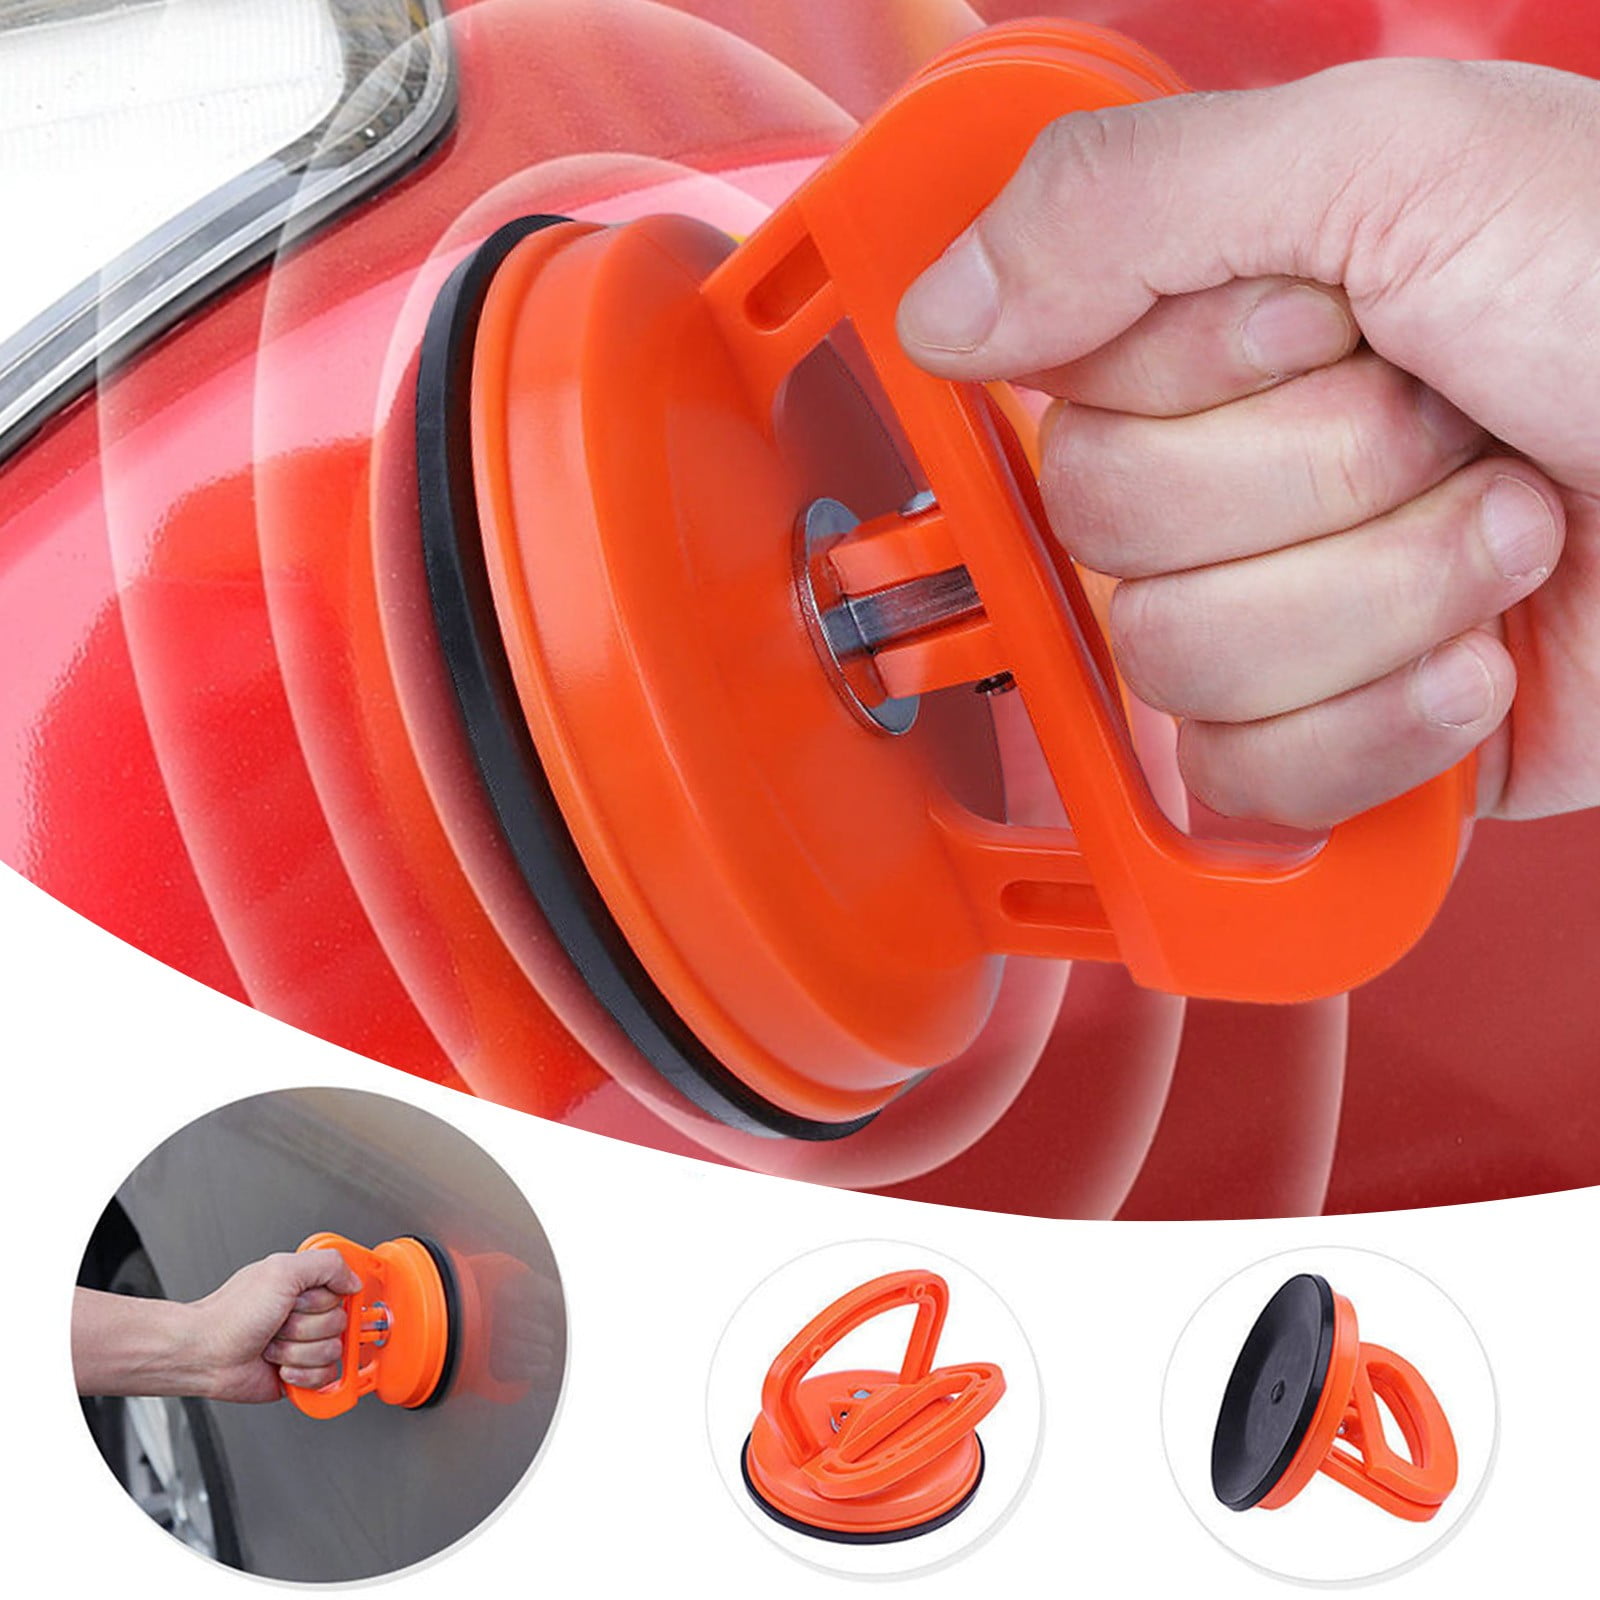 Car Dent Puller Suction Cup Car Dent Removal Repair Tool Car Dent Repair  Puller For Car Dent Repair, Glass, Tiles And Objects Moving 